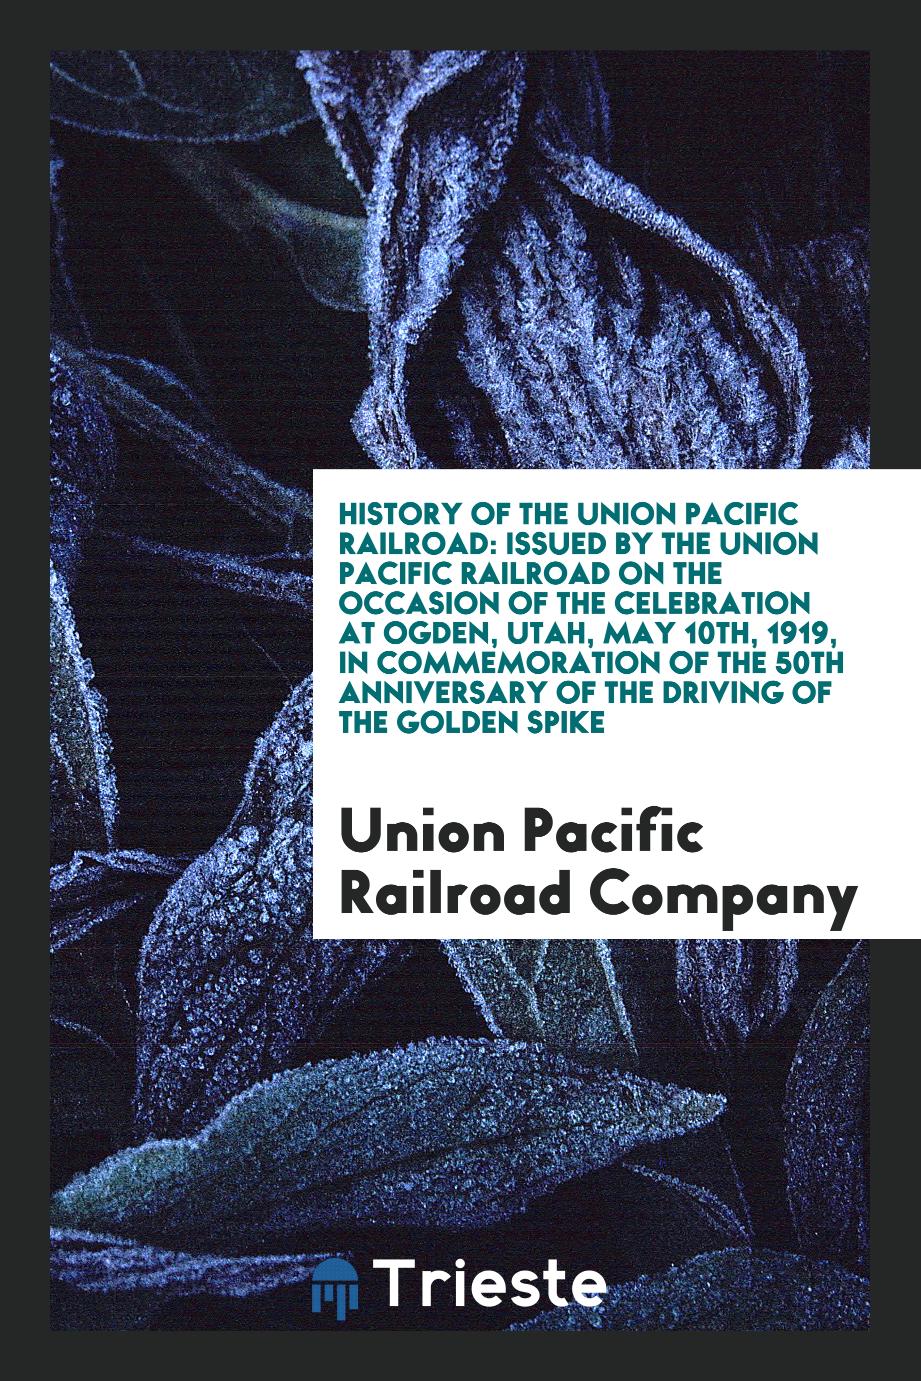 History of the Union Pacific railroad: issued by the Union Pacific railroad on the occasion of the celebration at Ogden, Utah, May 10th, 1919, in commemoration of the 50th anniversary of the driving of the golden spike